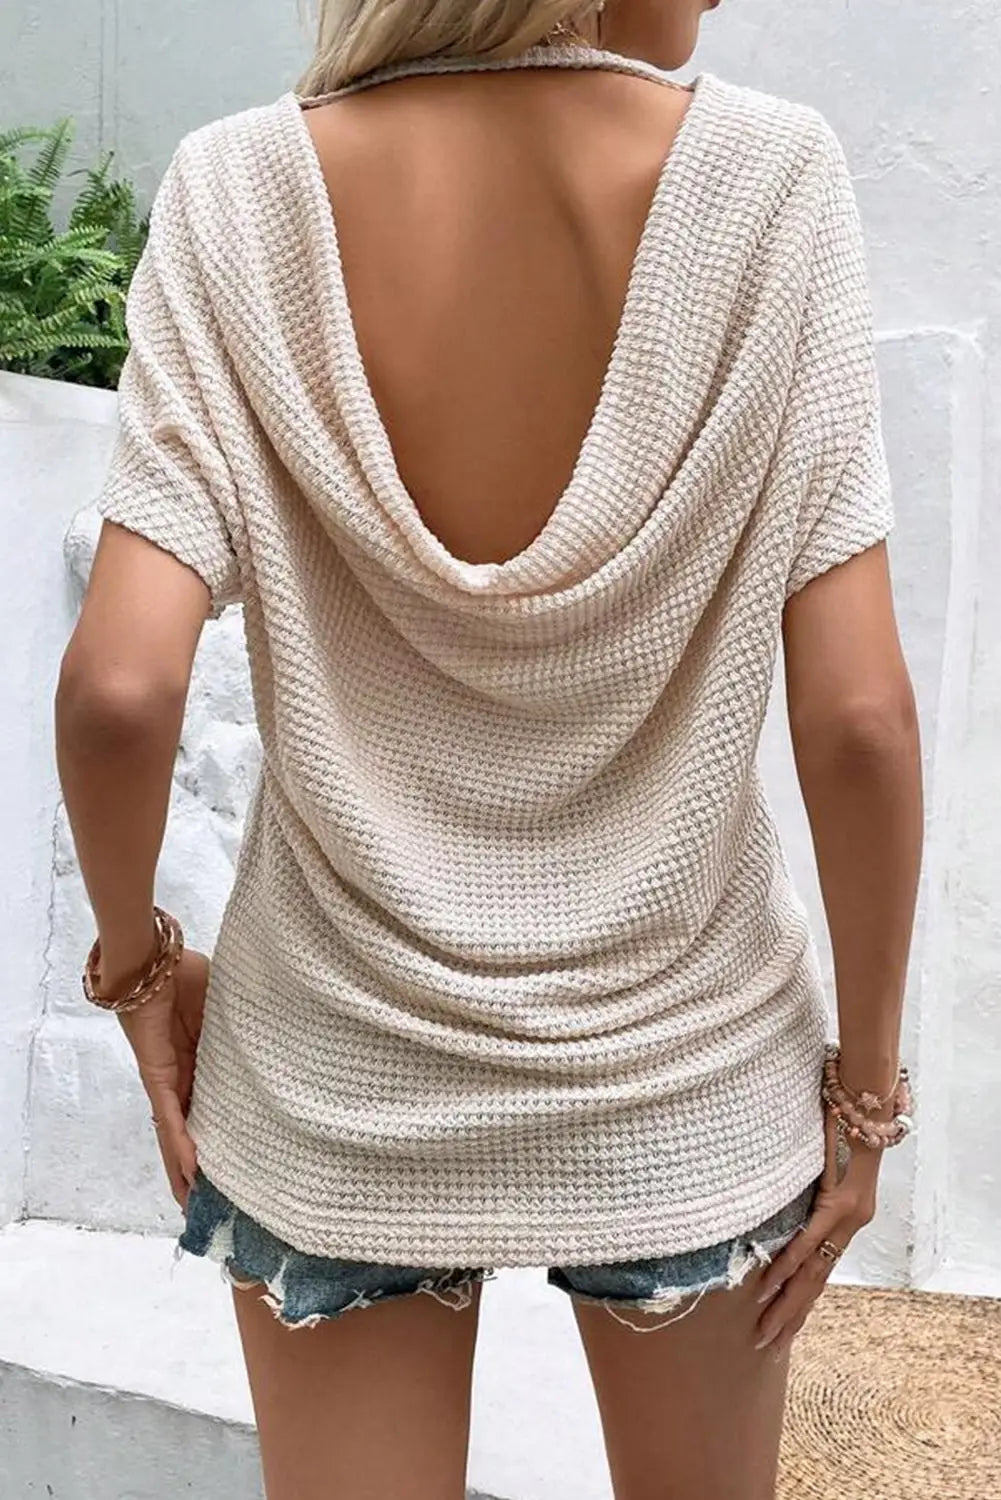 Apricot draped open back textured tee - tops & tees